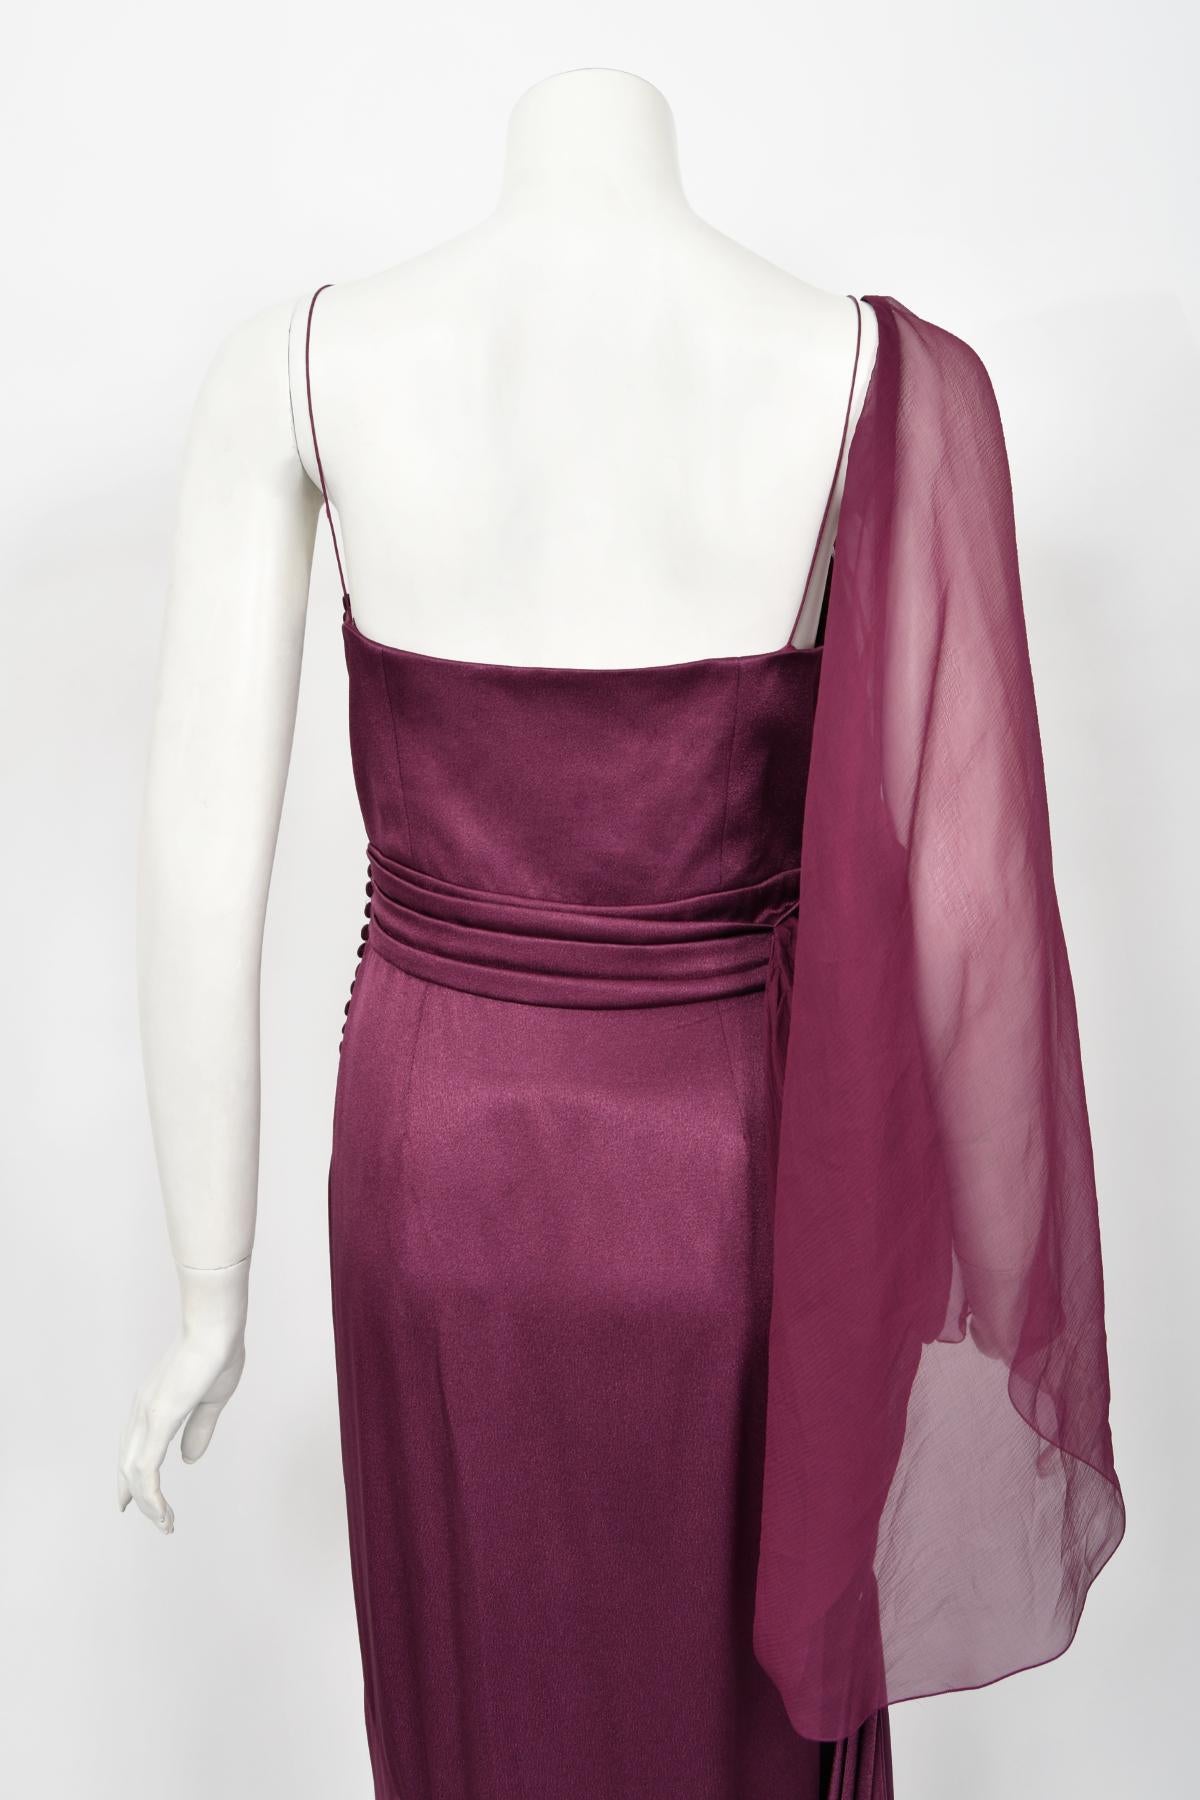 2000 Christian Dior by Galliano Purple Silk Sheer-Sleeve Asymmetric Draped Gown For Sale 8